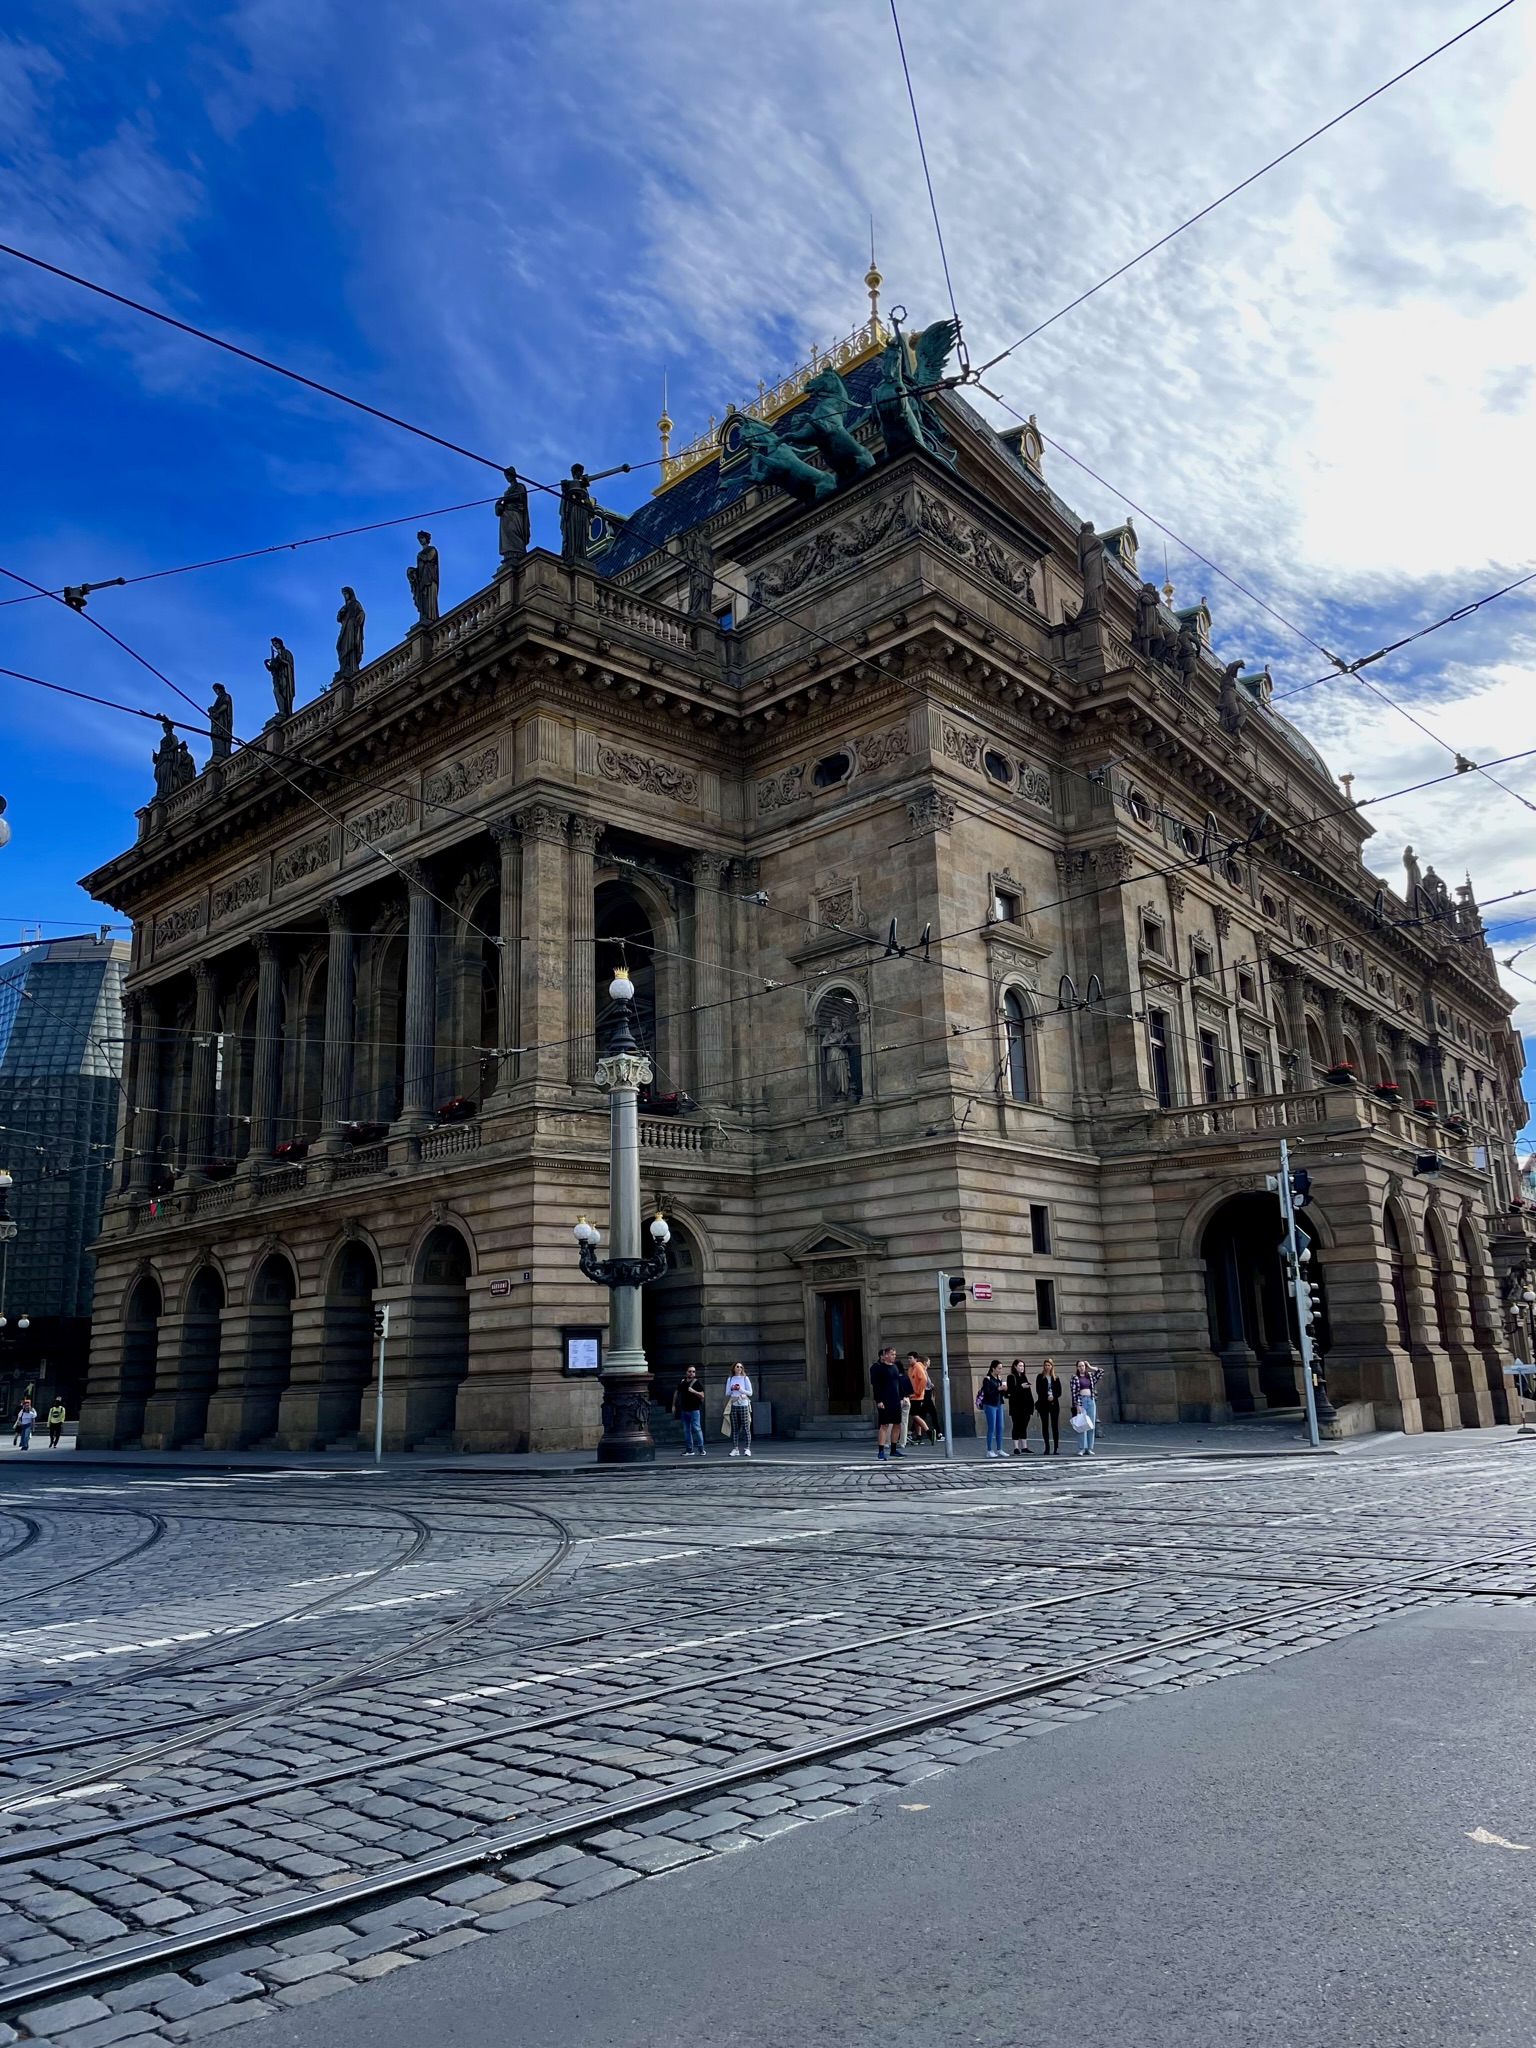 The National Theater in Prague